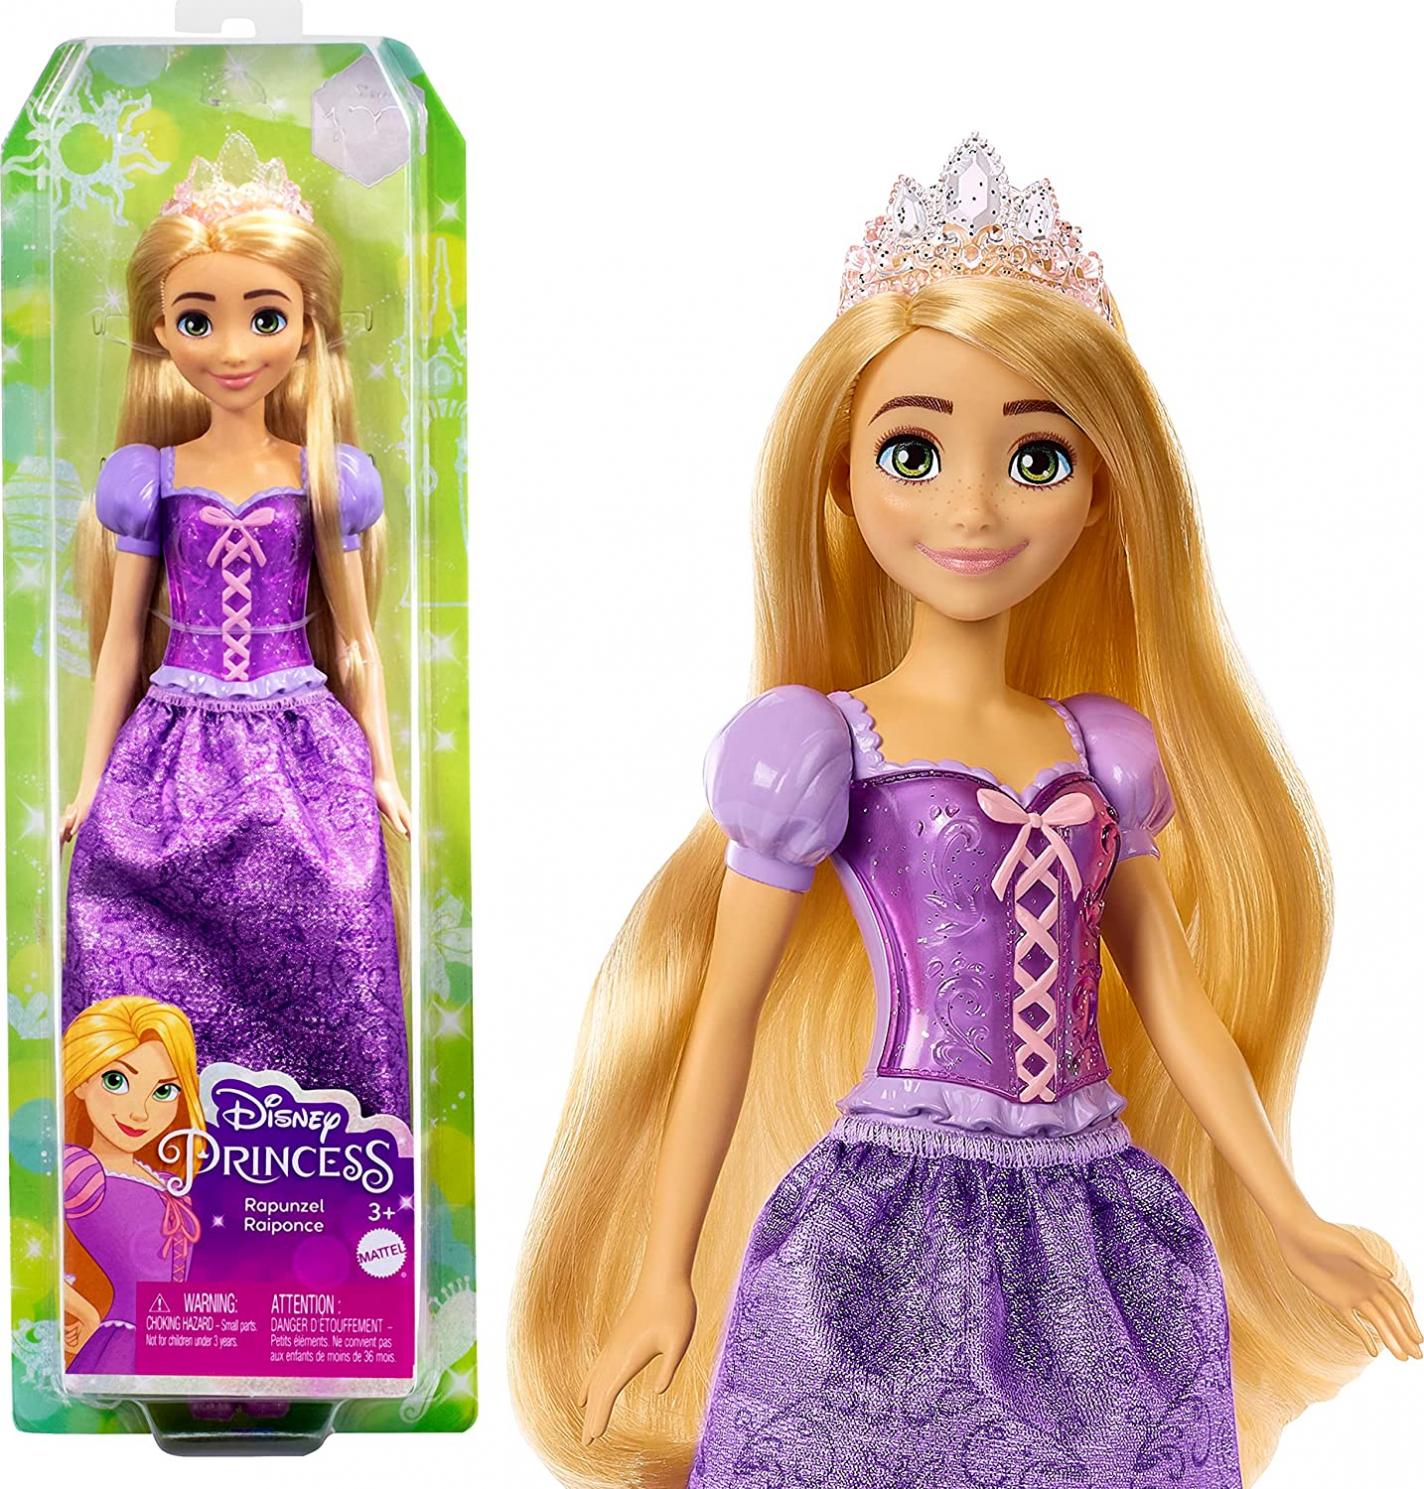 Disney Princess Rapunzel Fashion Doll, New for 2023, Sparkling Look with Blonde Hair, Blue Eyes & Tiara Accessory